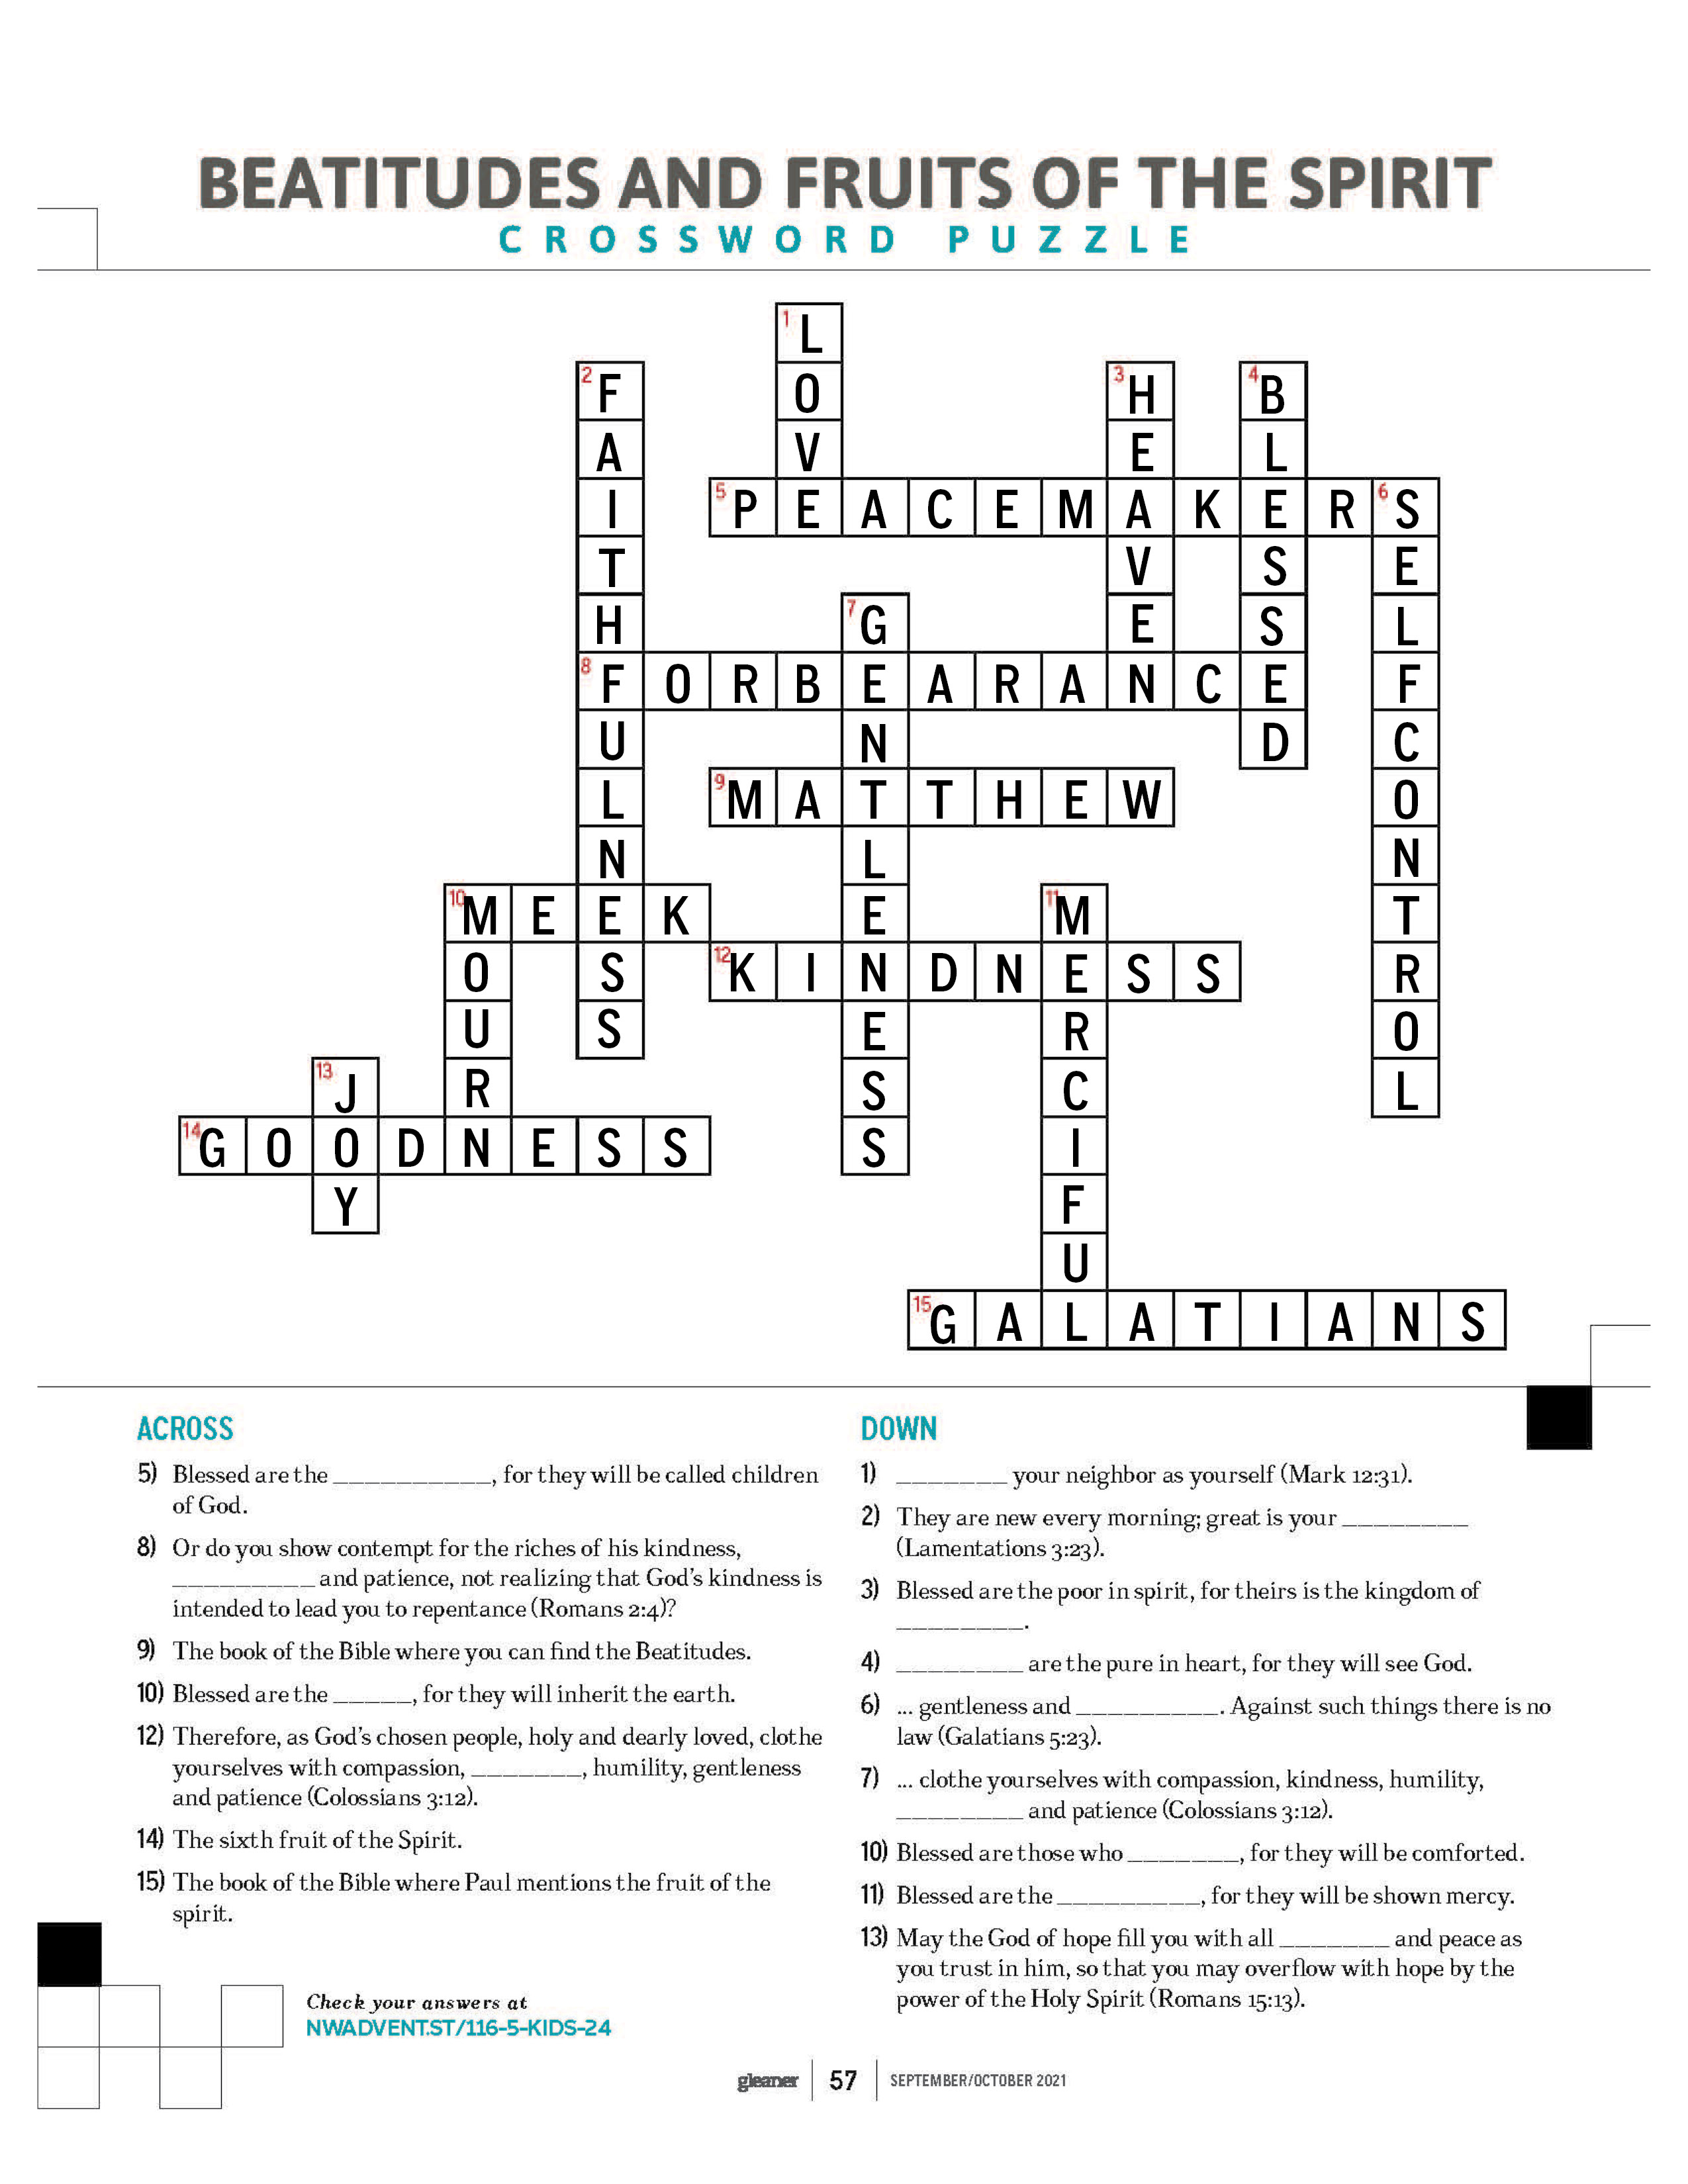 beatitudes-and-fruits-of-the-spirit-crossword-puzzle-just-for-kids